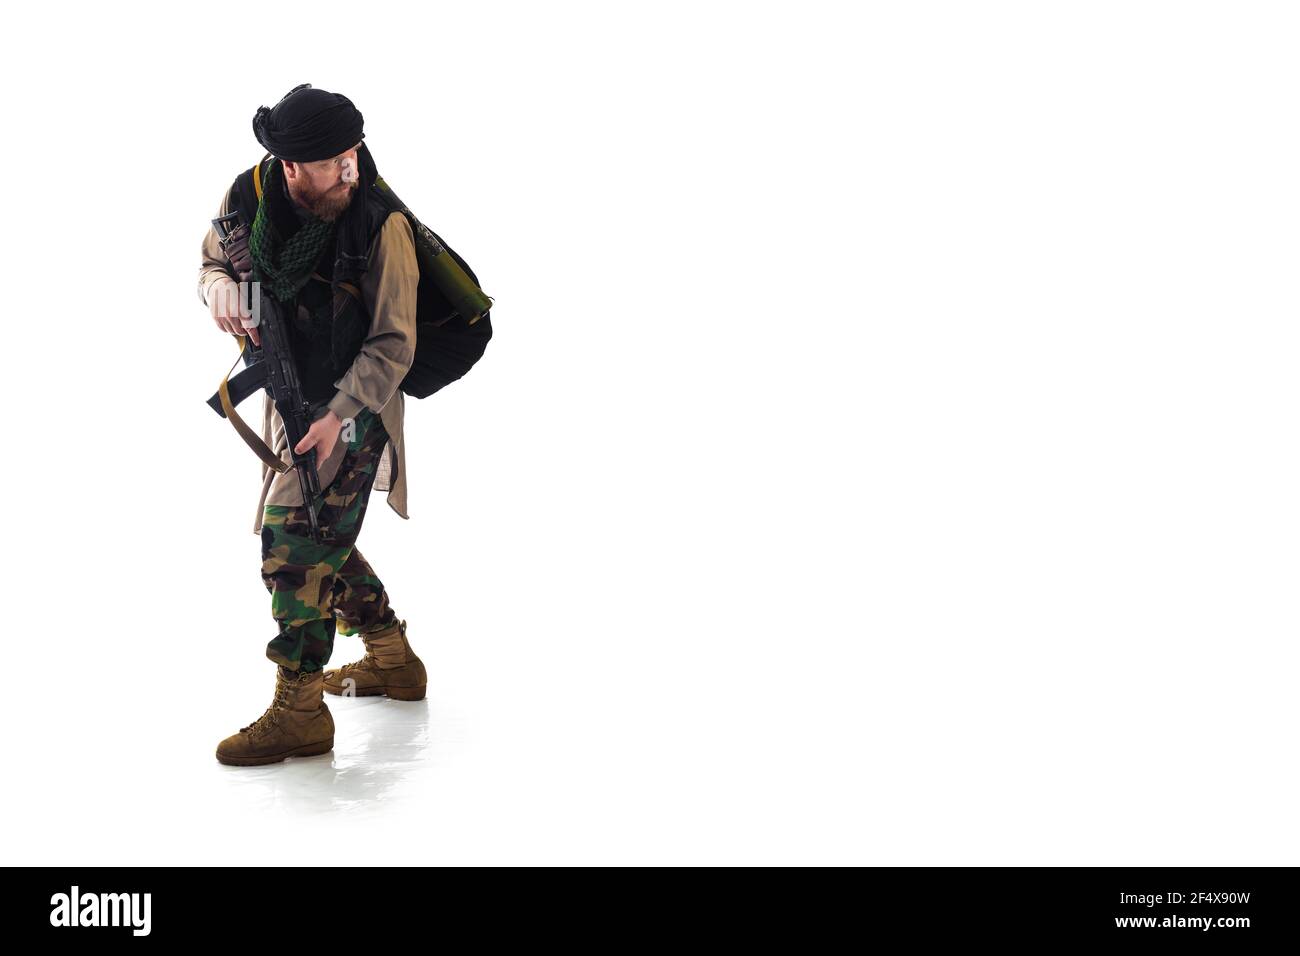 man in military outfit warrior Mujahedin in modern times on a white background in studio Stock Photo